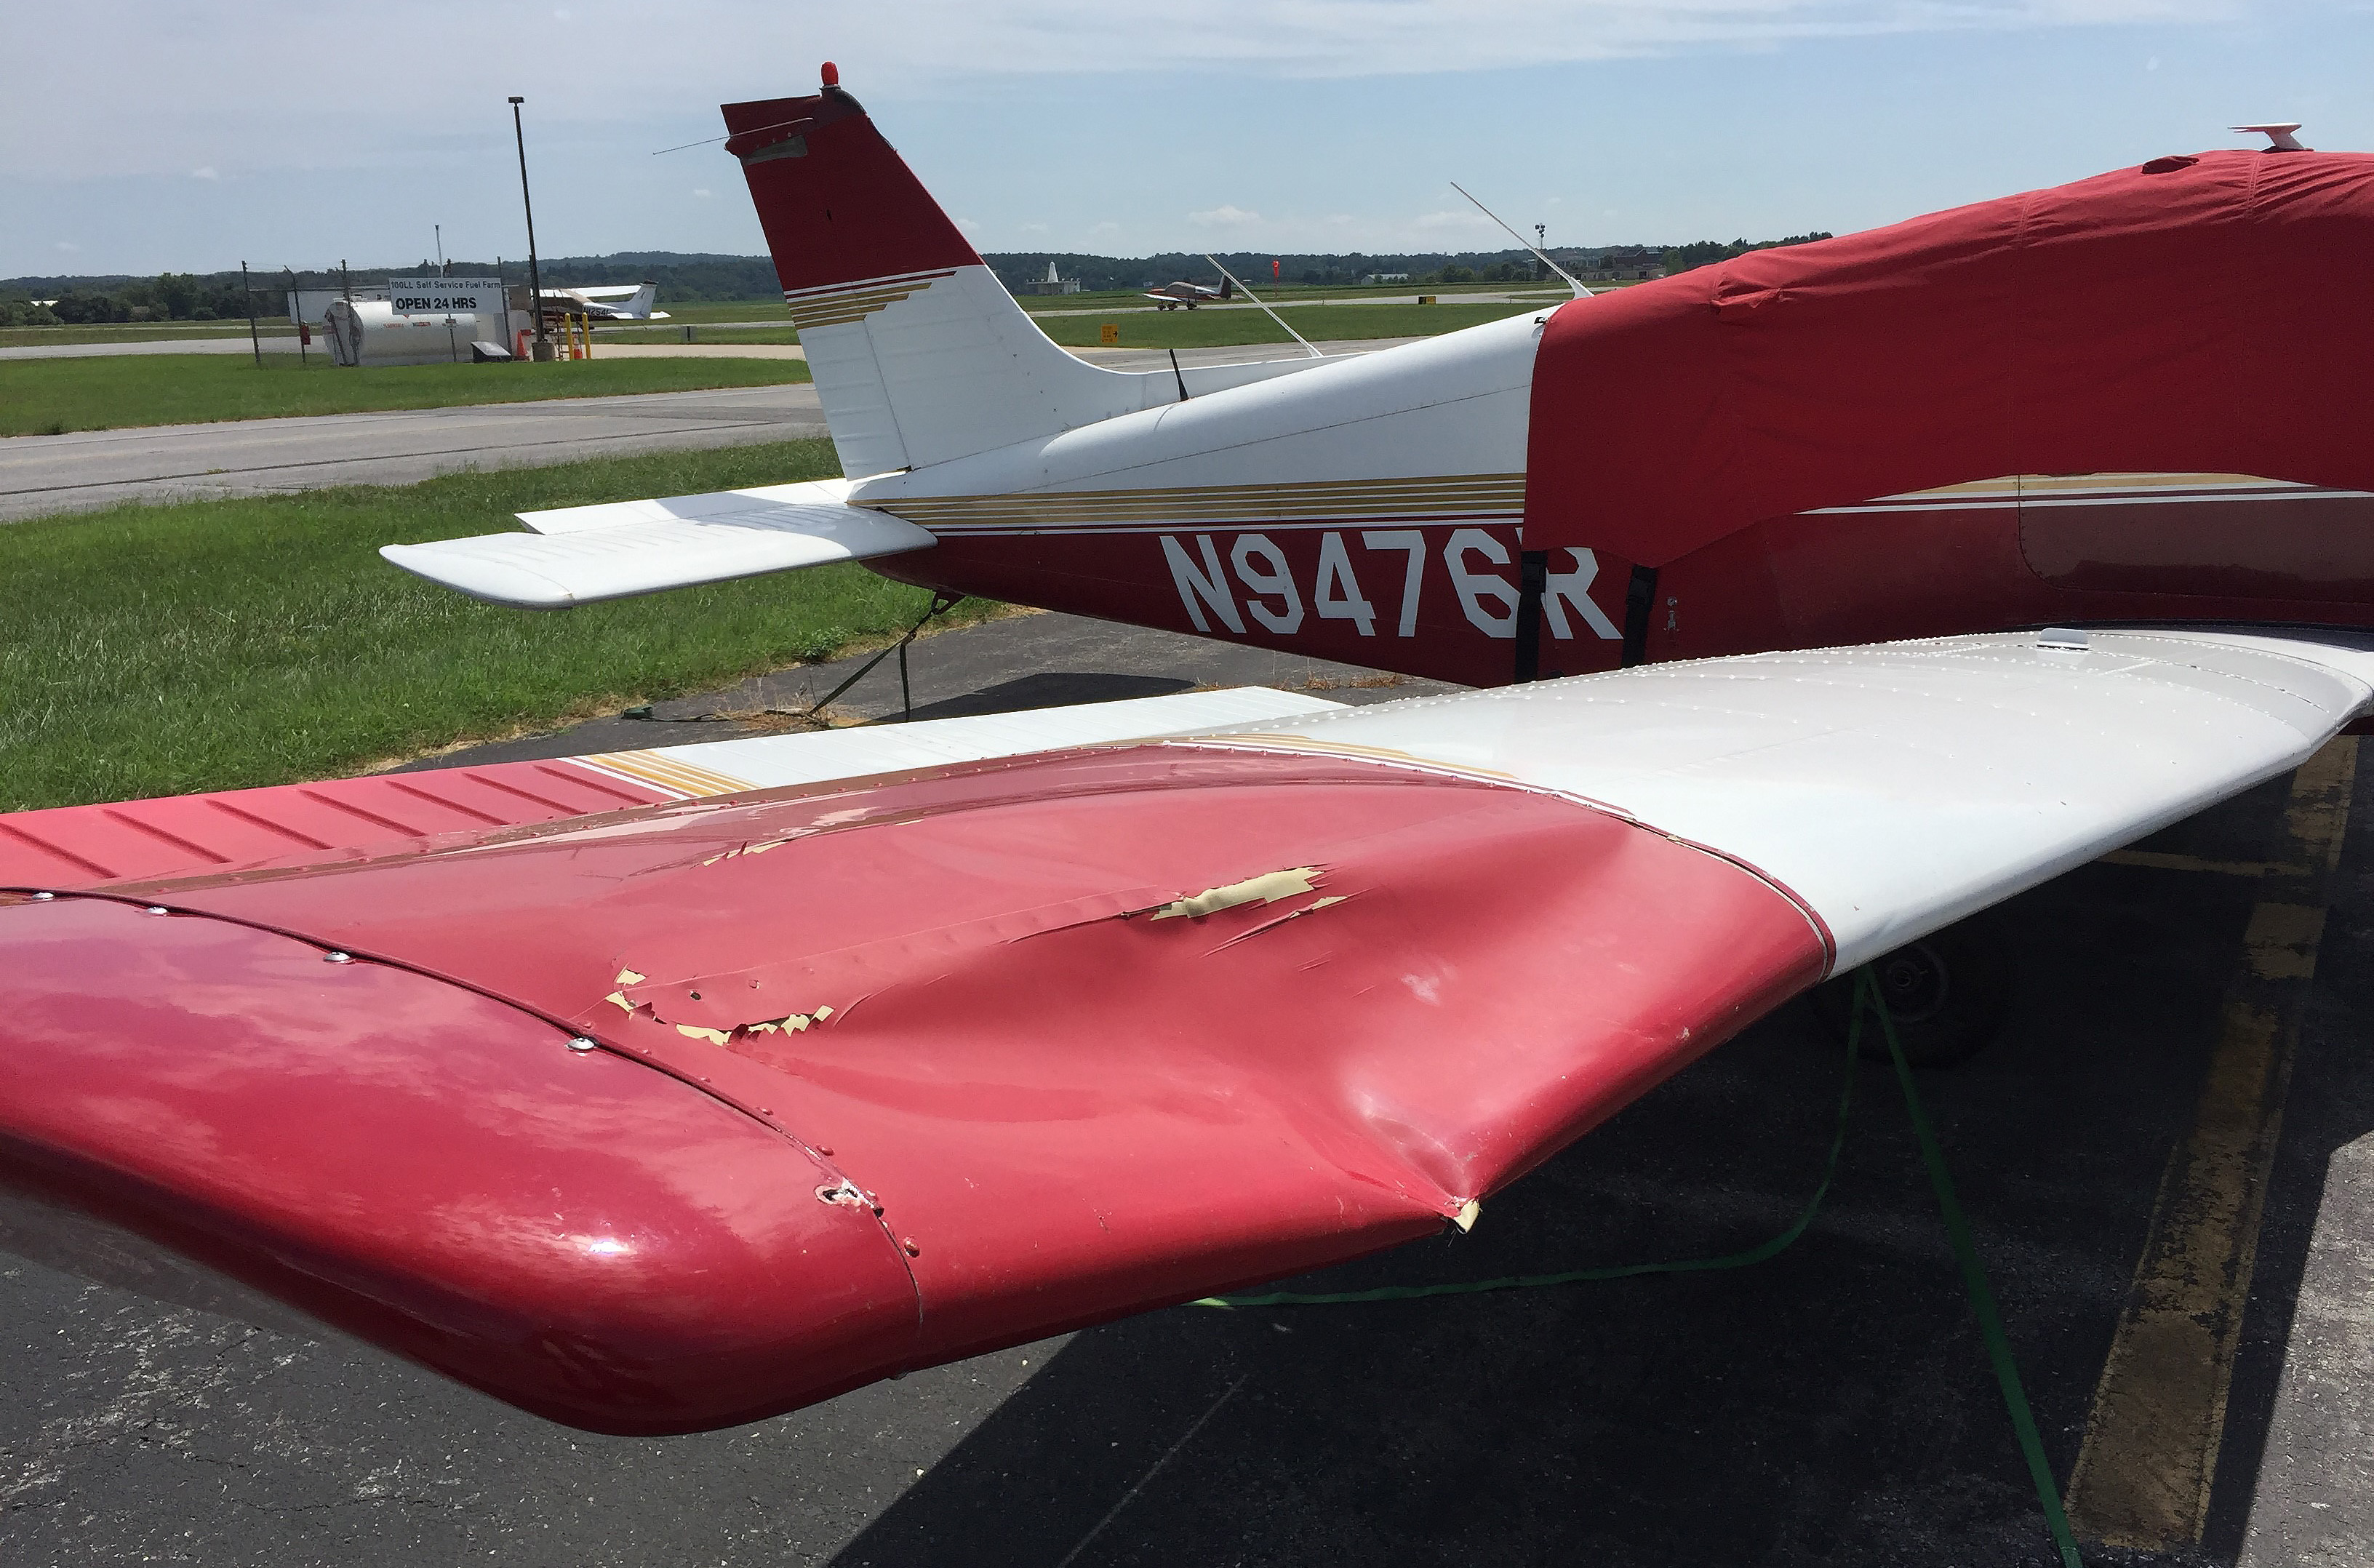 The Octopus Flight Club's Piper Warrior shows damage from a bird strike encountered by pilot Ali Kaan Ozdemir and Ambra Xhepa before an emergency descent into Frederick Municipal Airport in Frederick, Maryland. Photo by David Tulis.